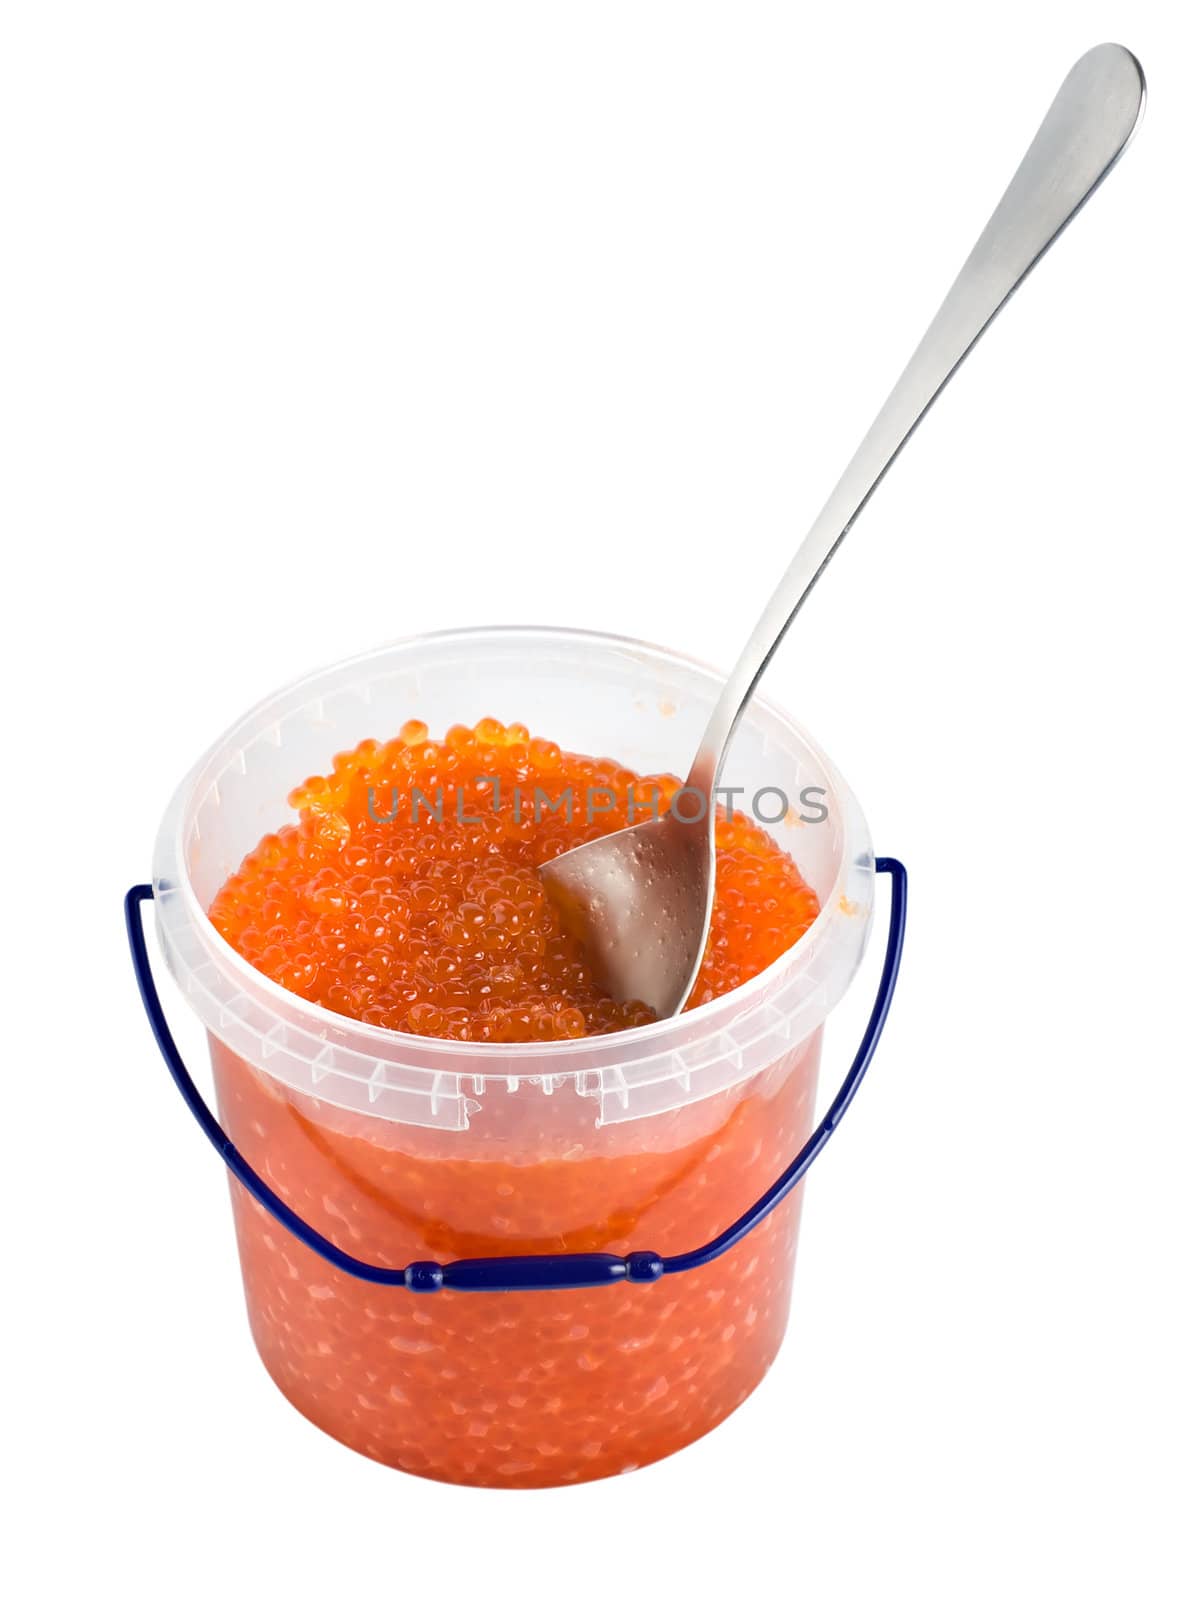 Red caviar in a plastic container isolated on a white background